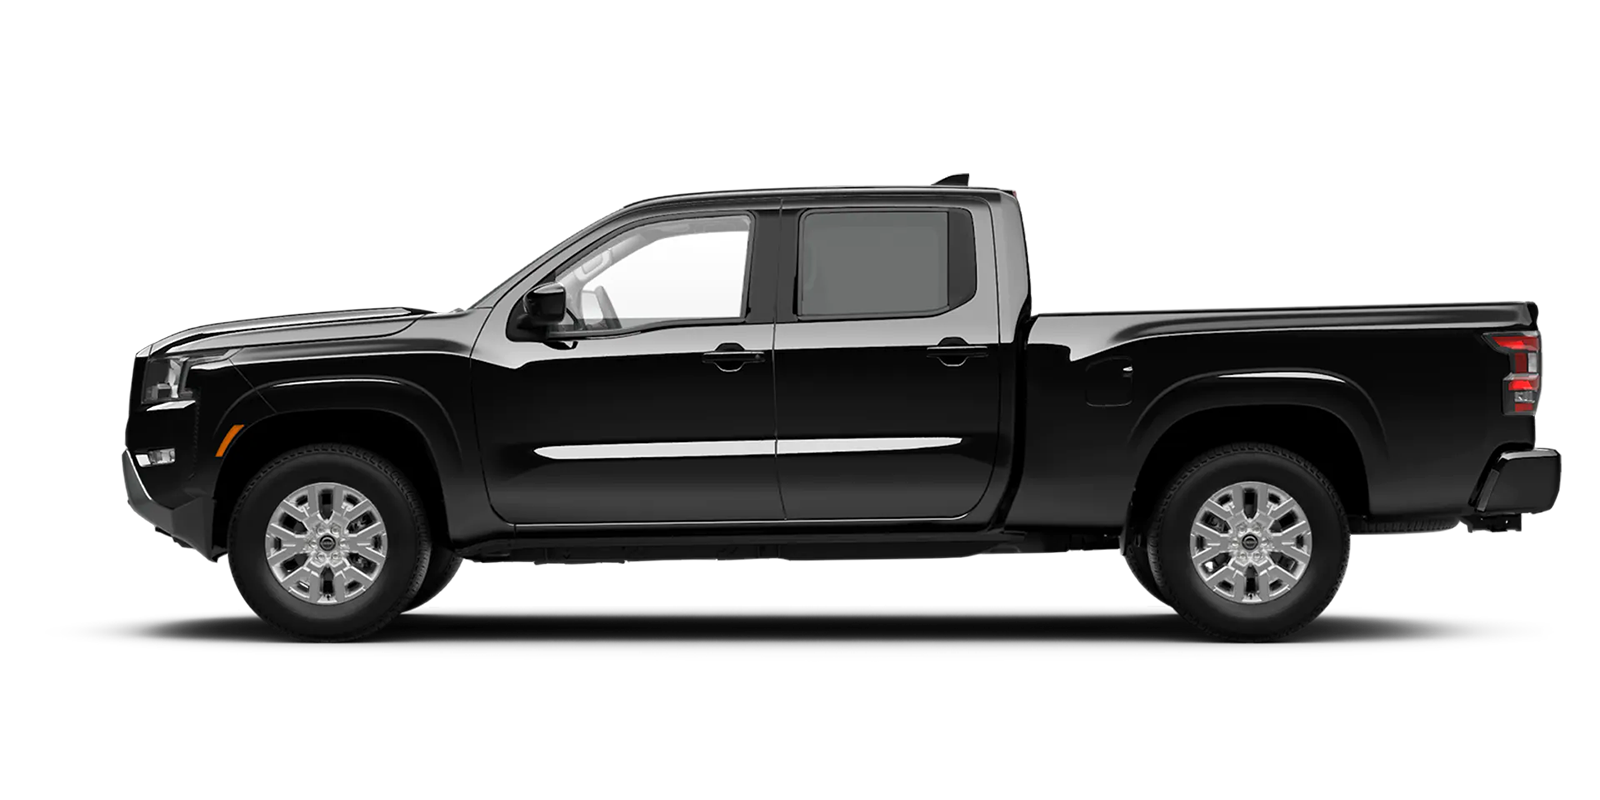 2022 Frontier Crew Cab Long Bed SV 4x4 in Super Black | Vann York's High Point Nissan in High Point NC